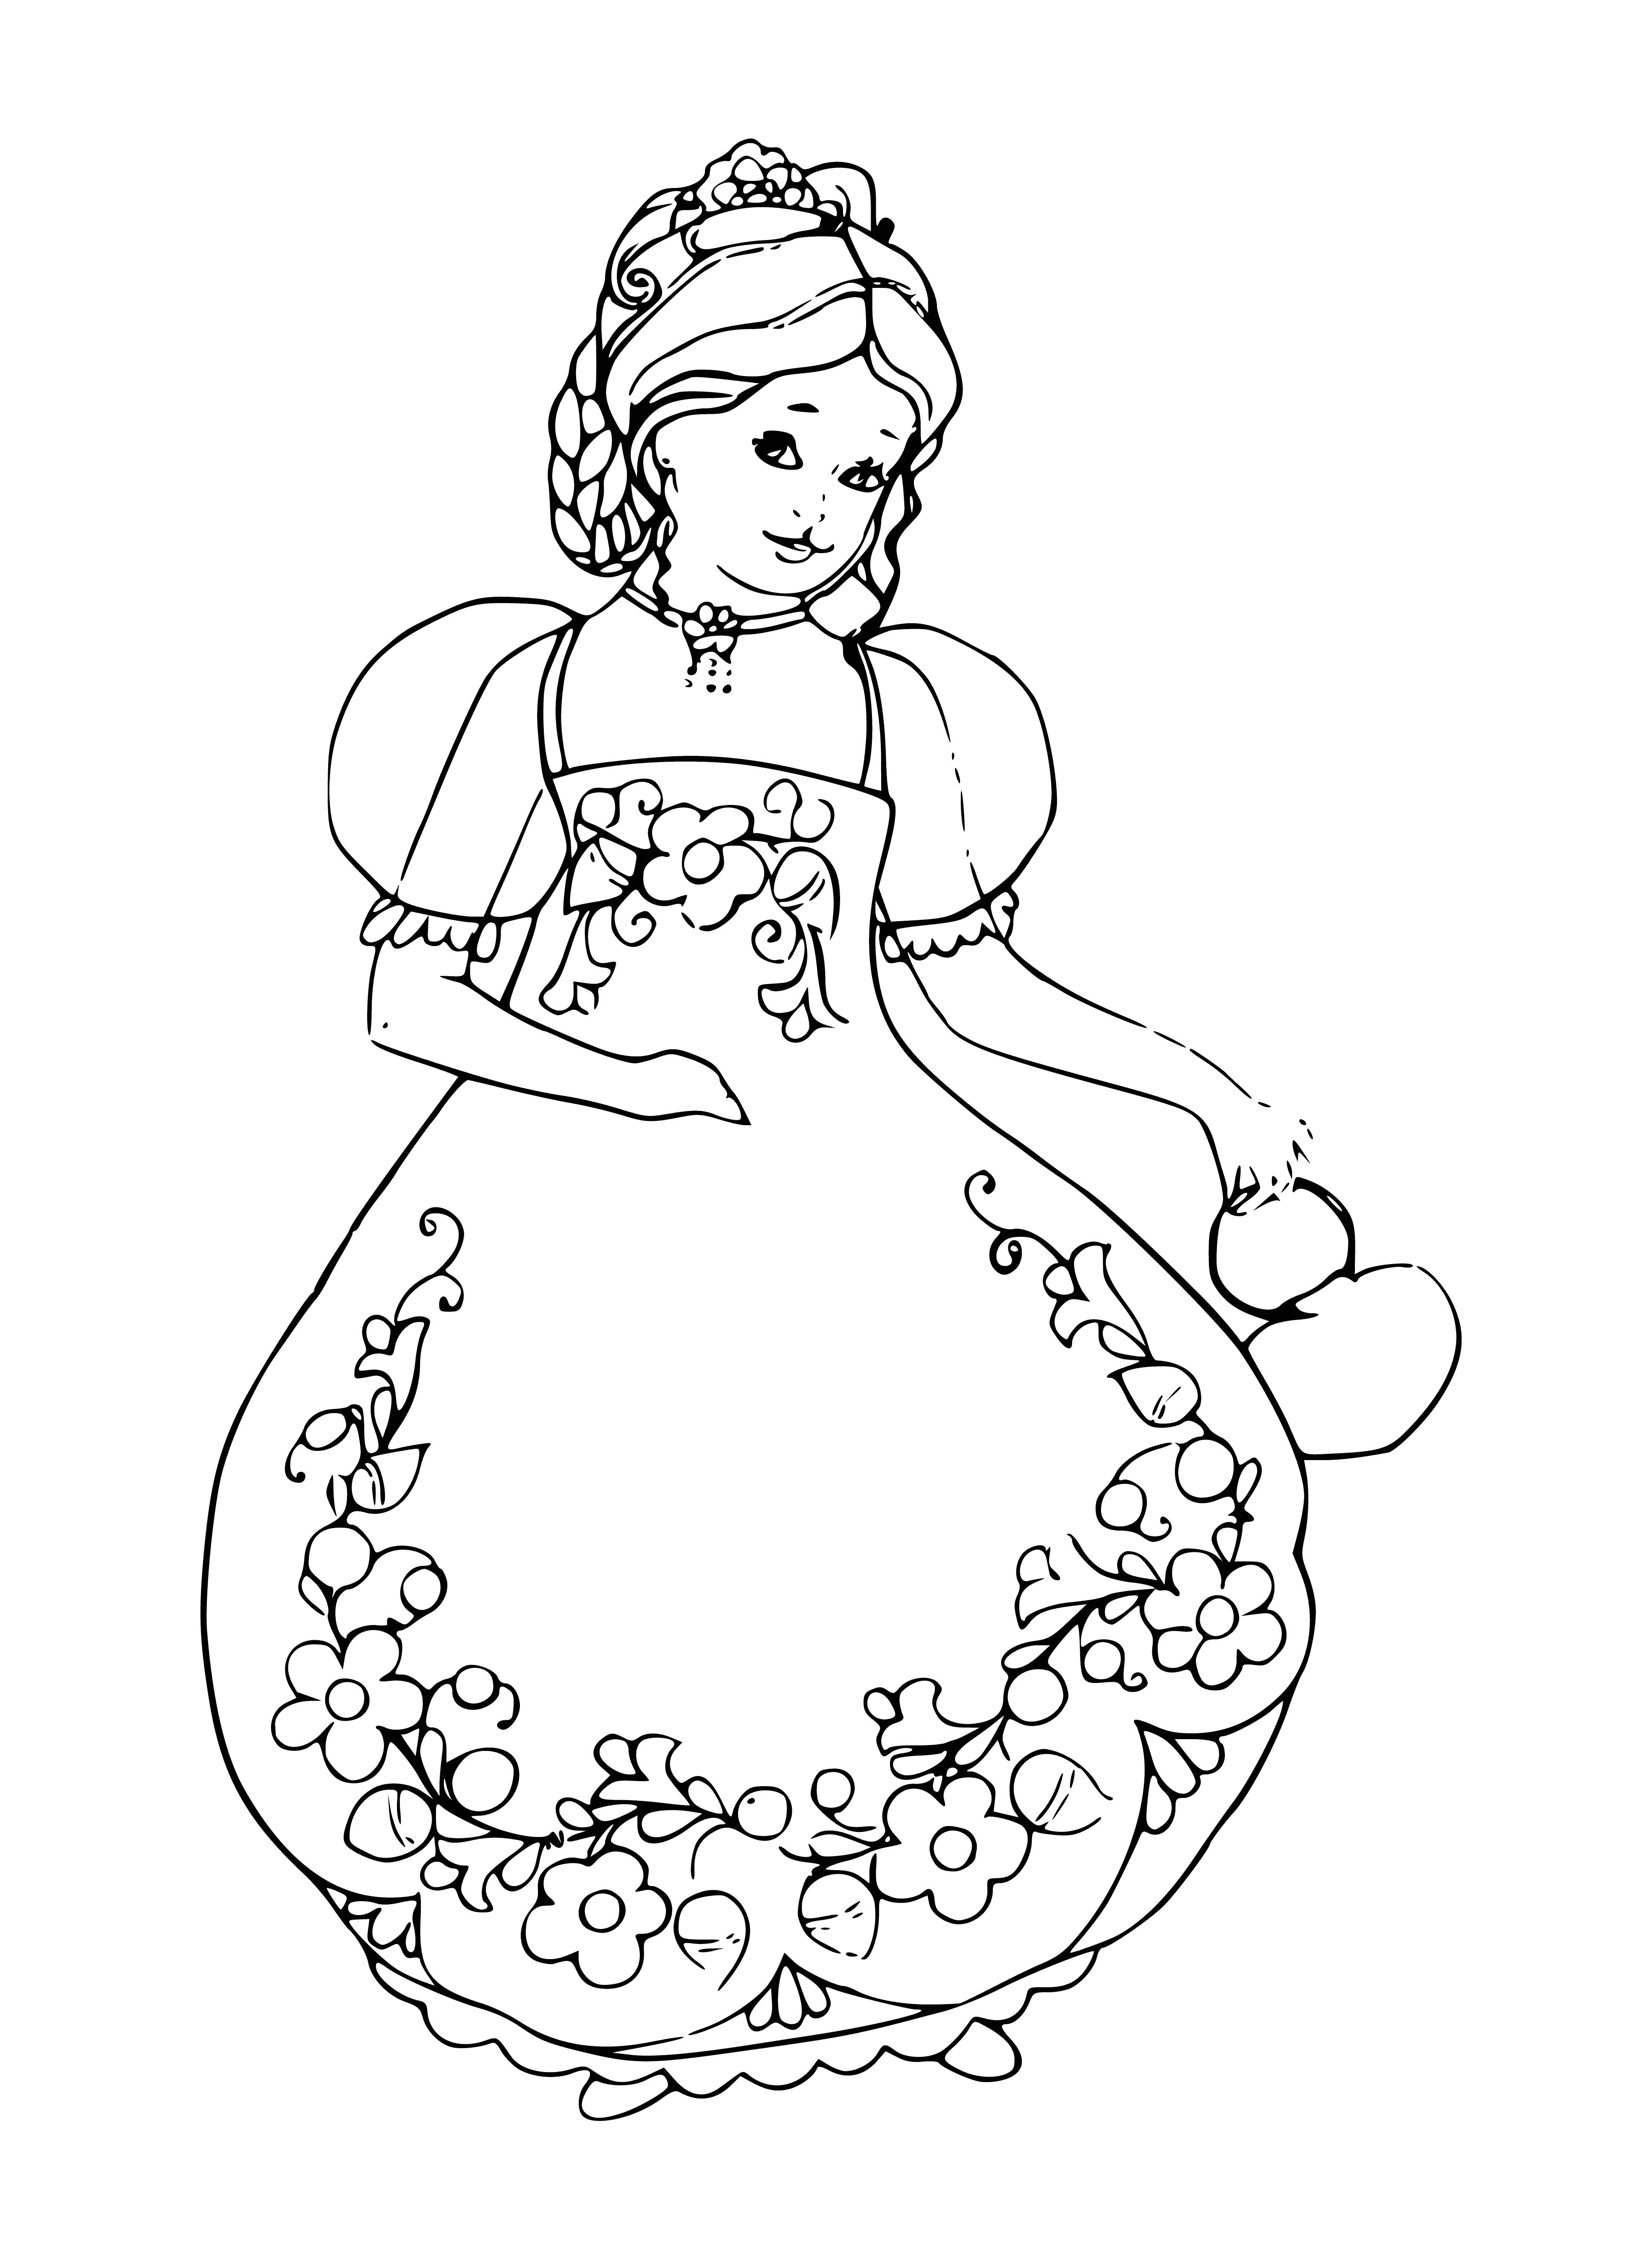 coloring page: Woman standing in front of mirror adjusting her hair; wearing dress w/ floral pattern, high neckline & long sleeves w/earrings.